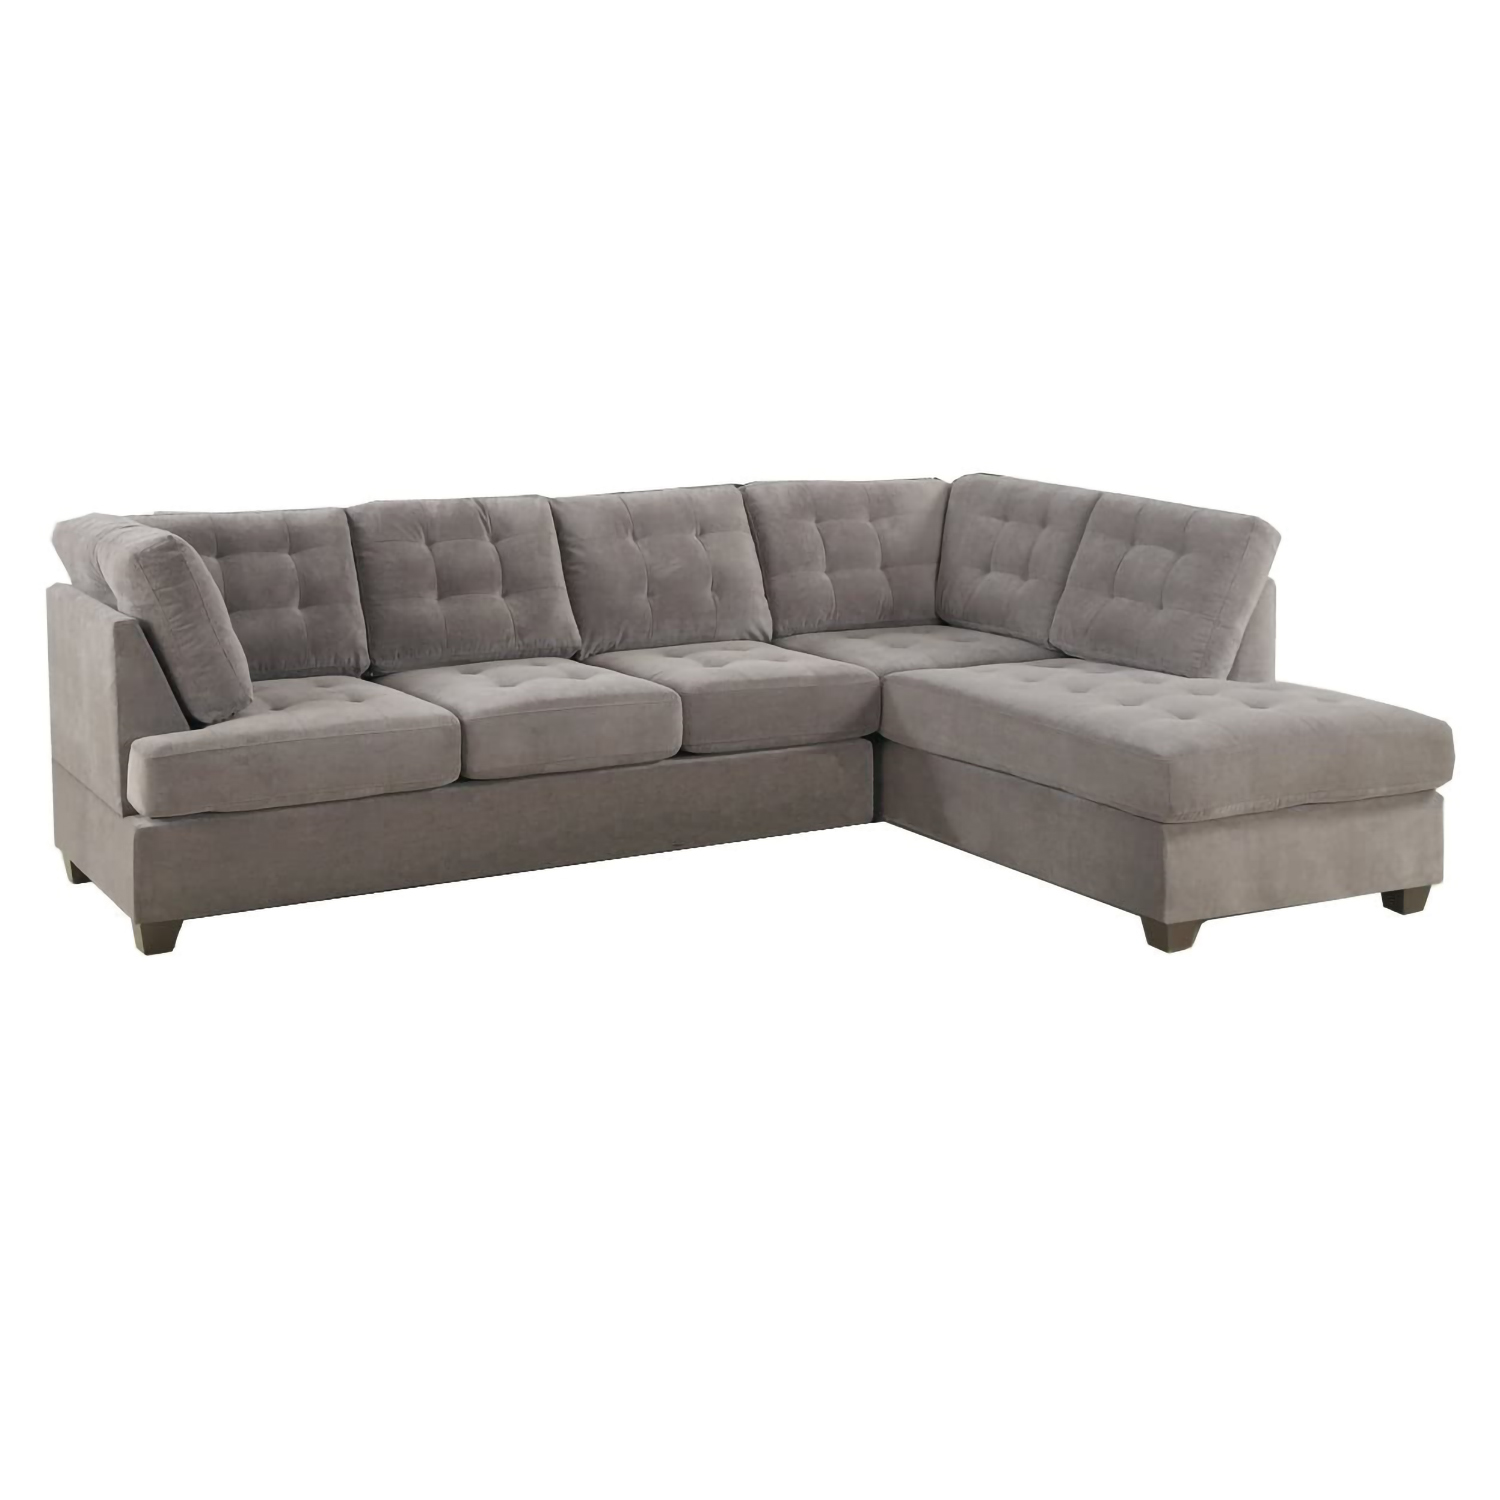 Living Room Sectional Waffle Suede Charcoal Color Sectional Sofa w Pillows Couch Tufted Cushion Contemporary (NO OTTOMAN)